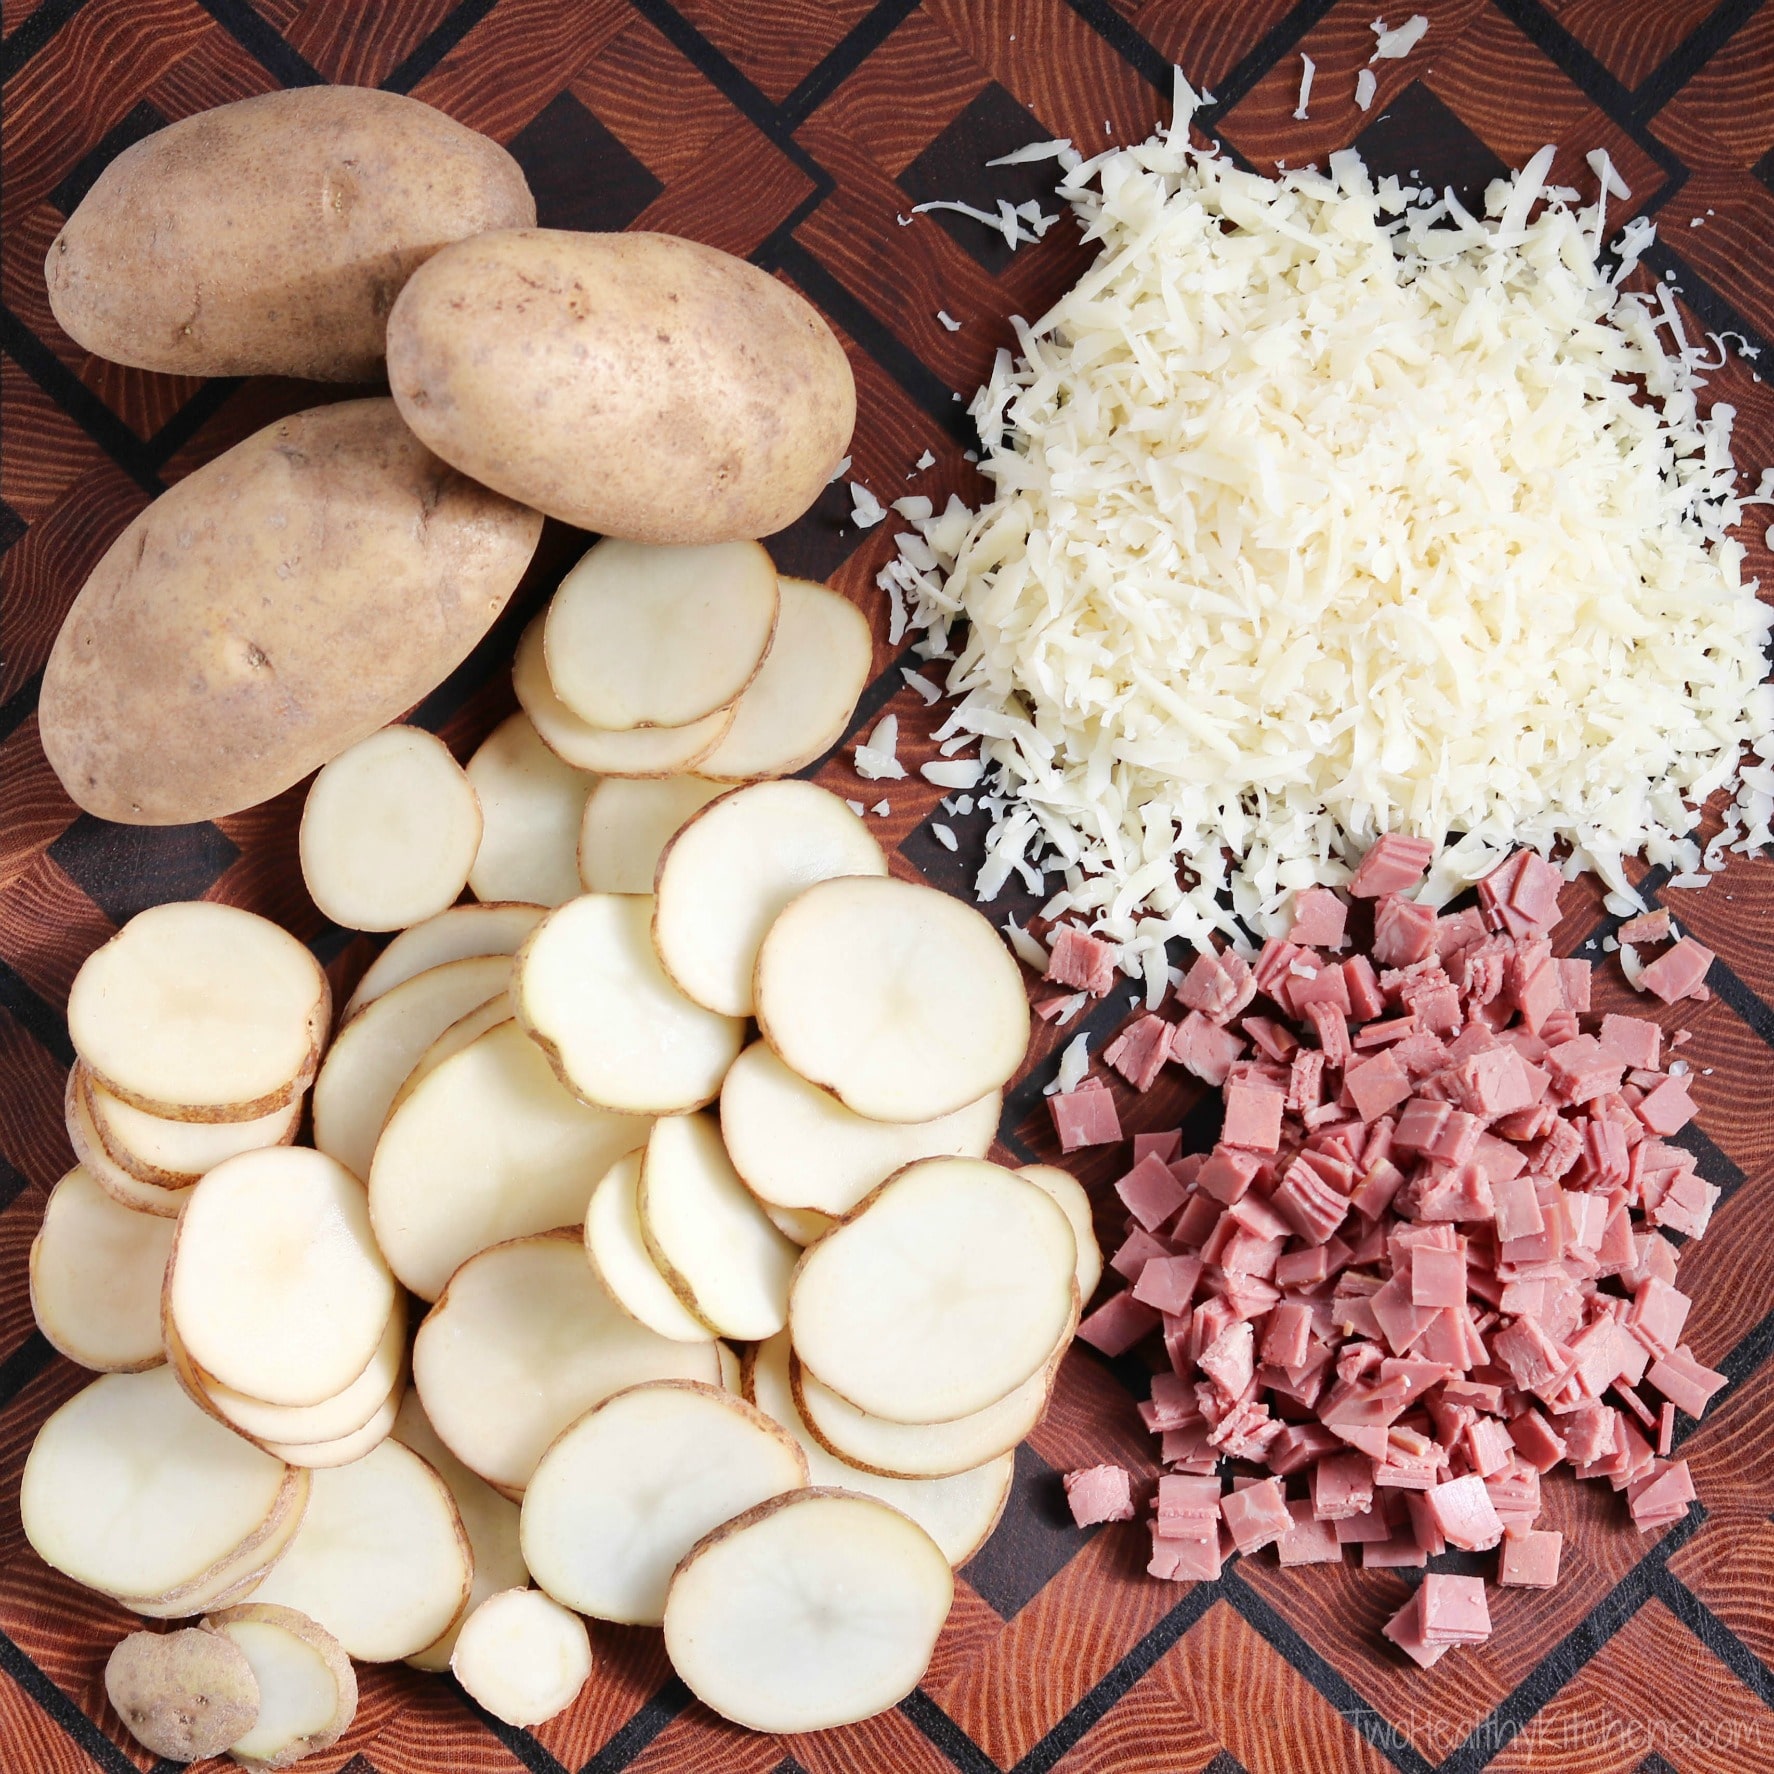 3 whole potatoes, potato slices, chopped corned beef and shredded Swiss cheese in piles on patterned wood cutting board.